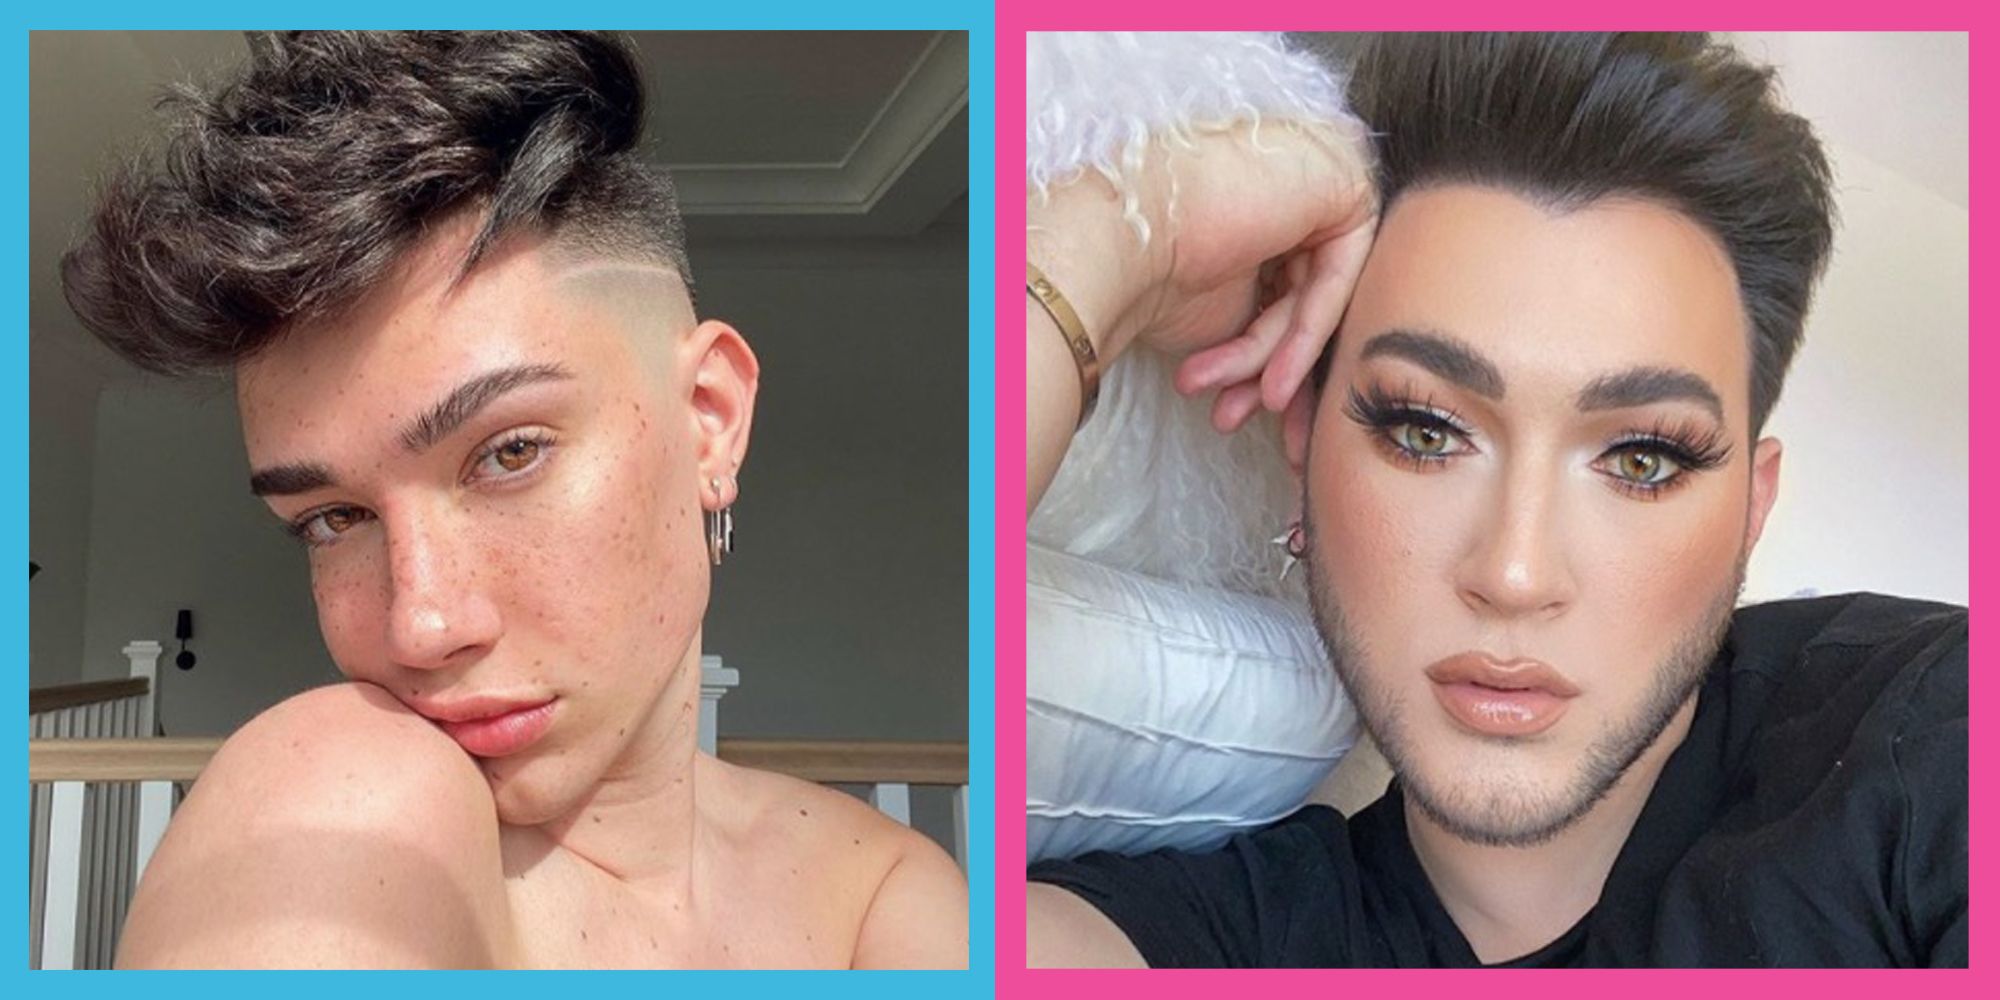 James Charles and Manny MUA public apologies to Alicia Keys